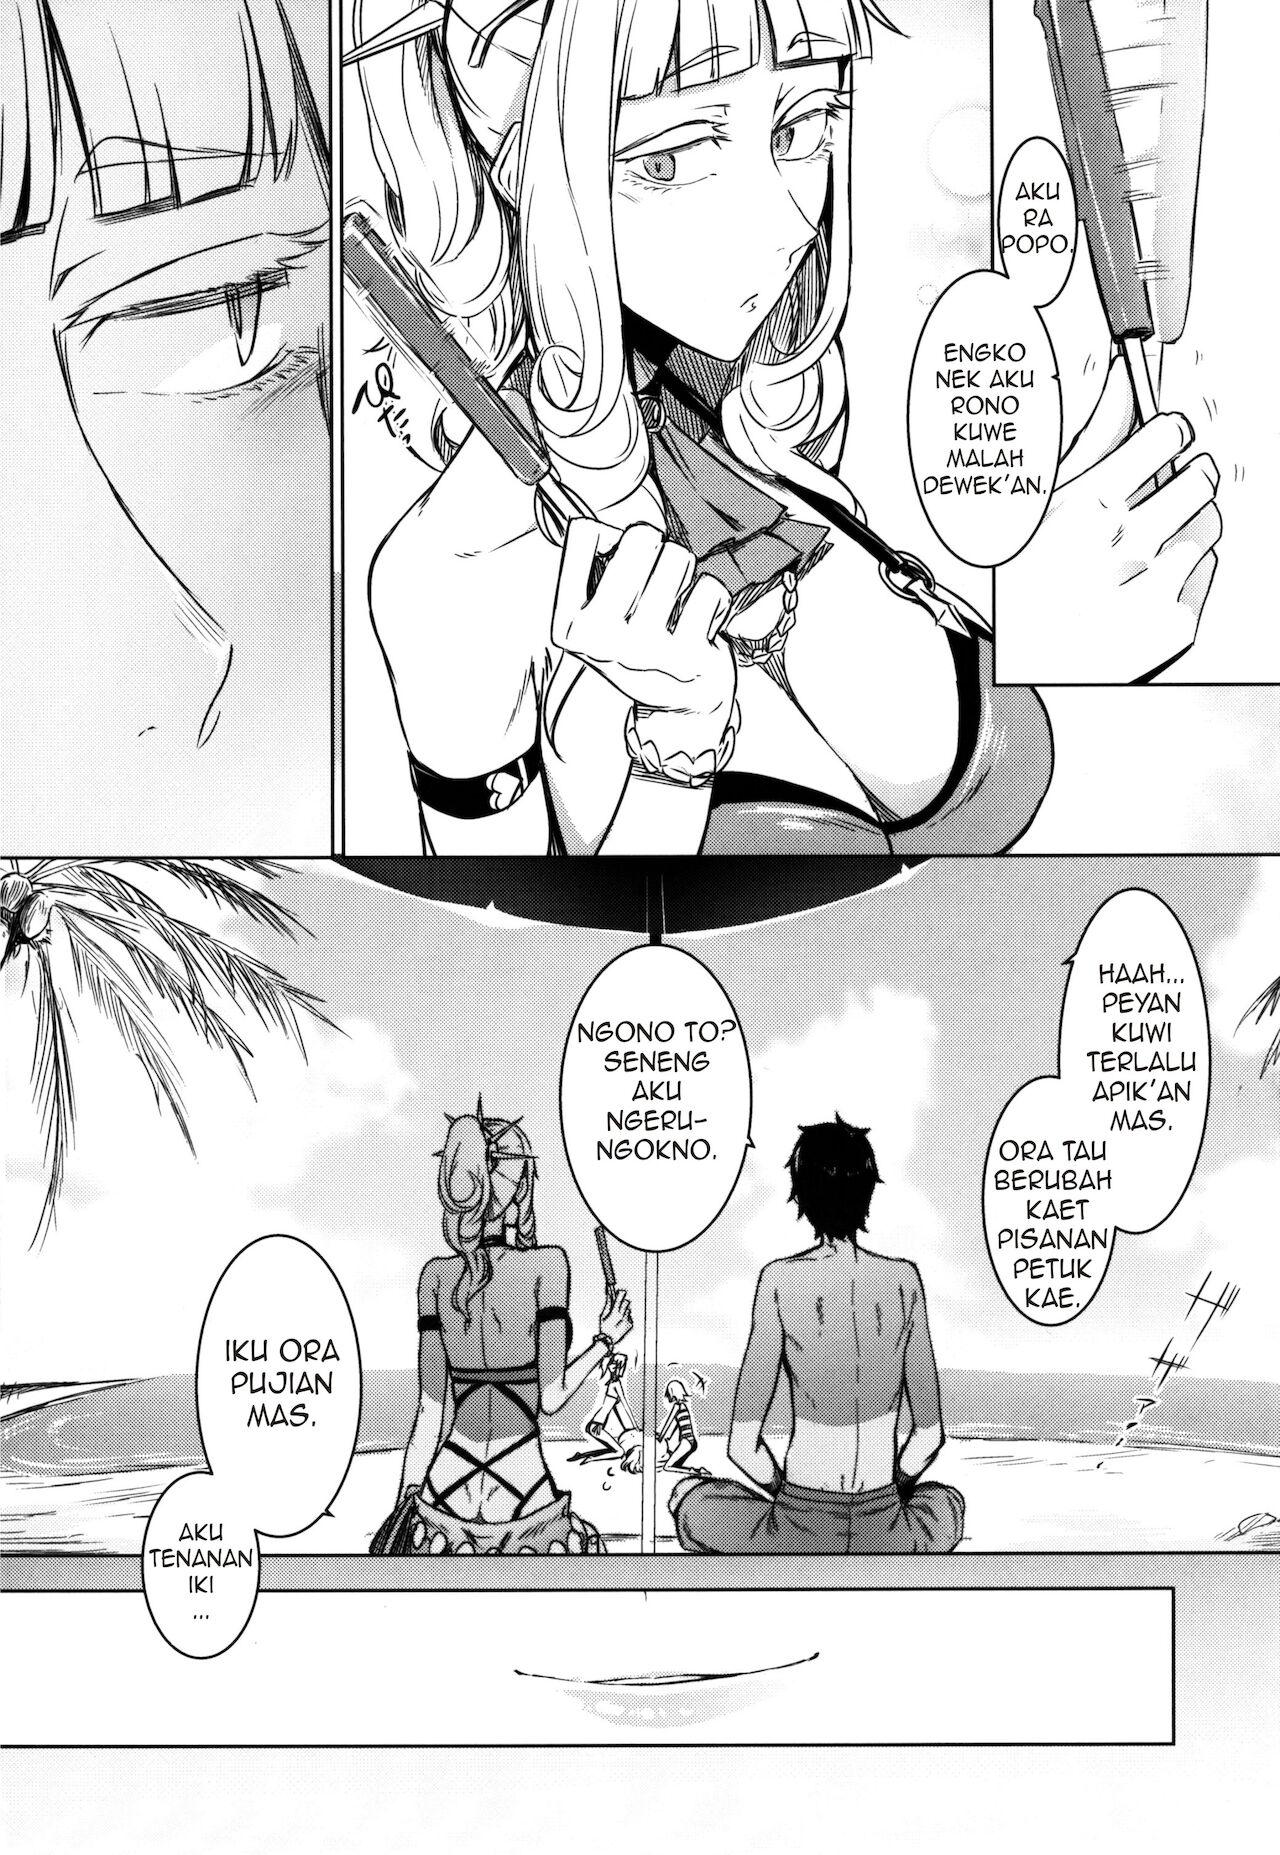 Best Blowjob Lust Vampire - Fate grand order Hot Wife - Page 7